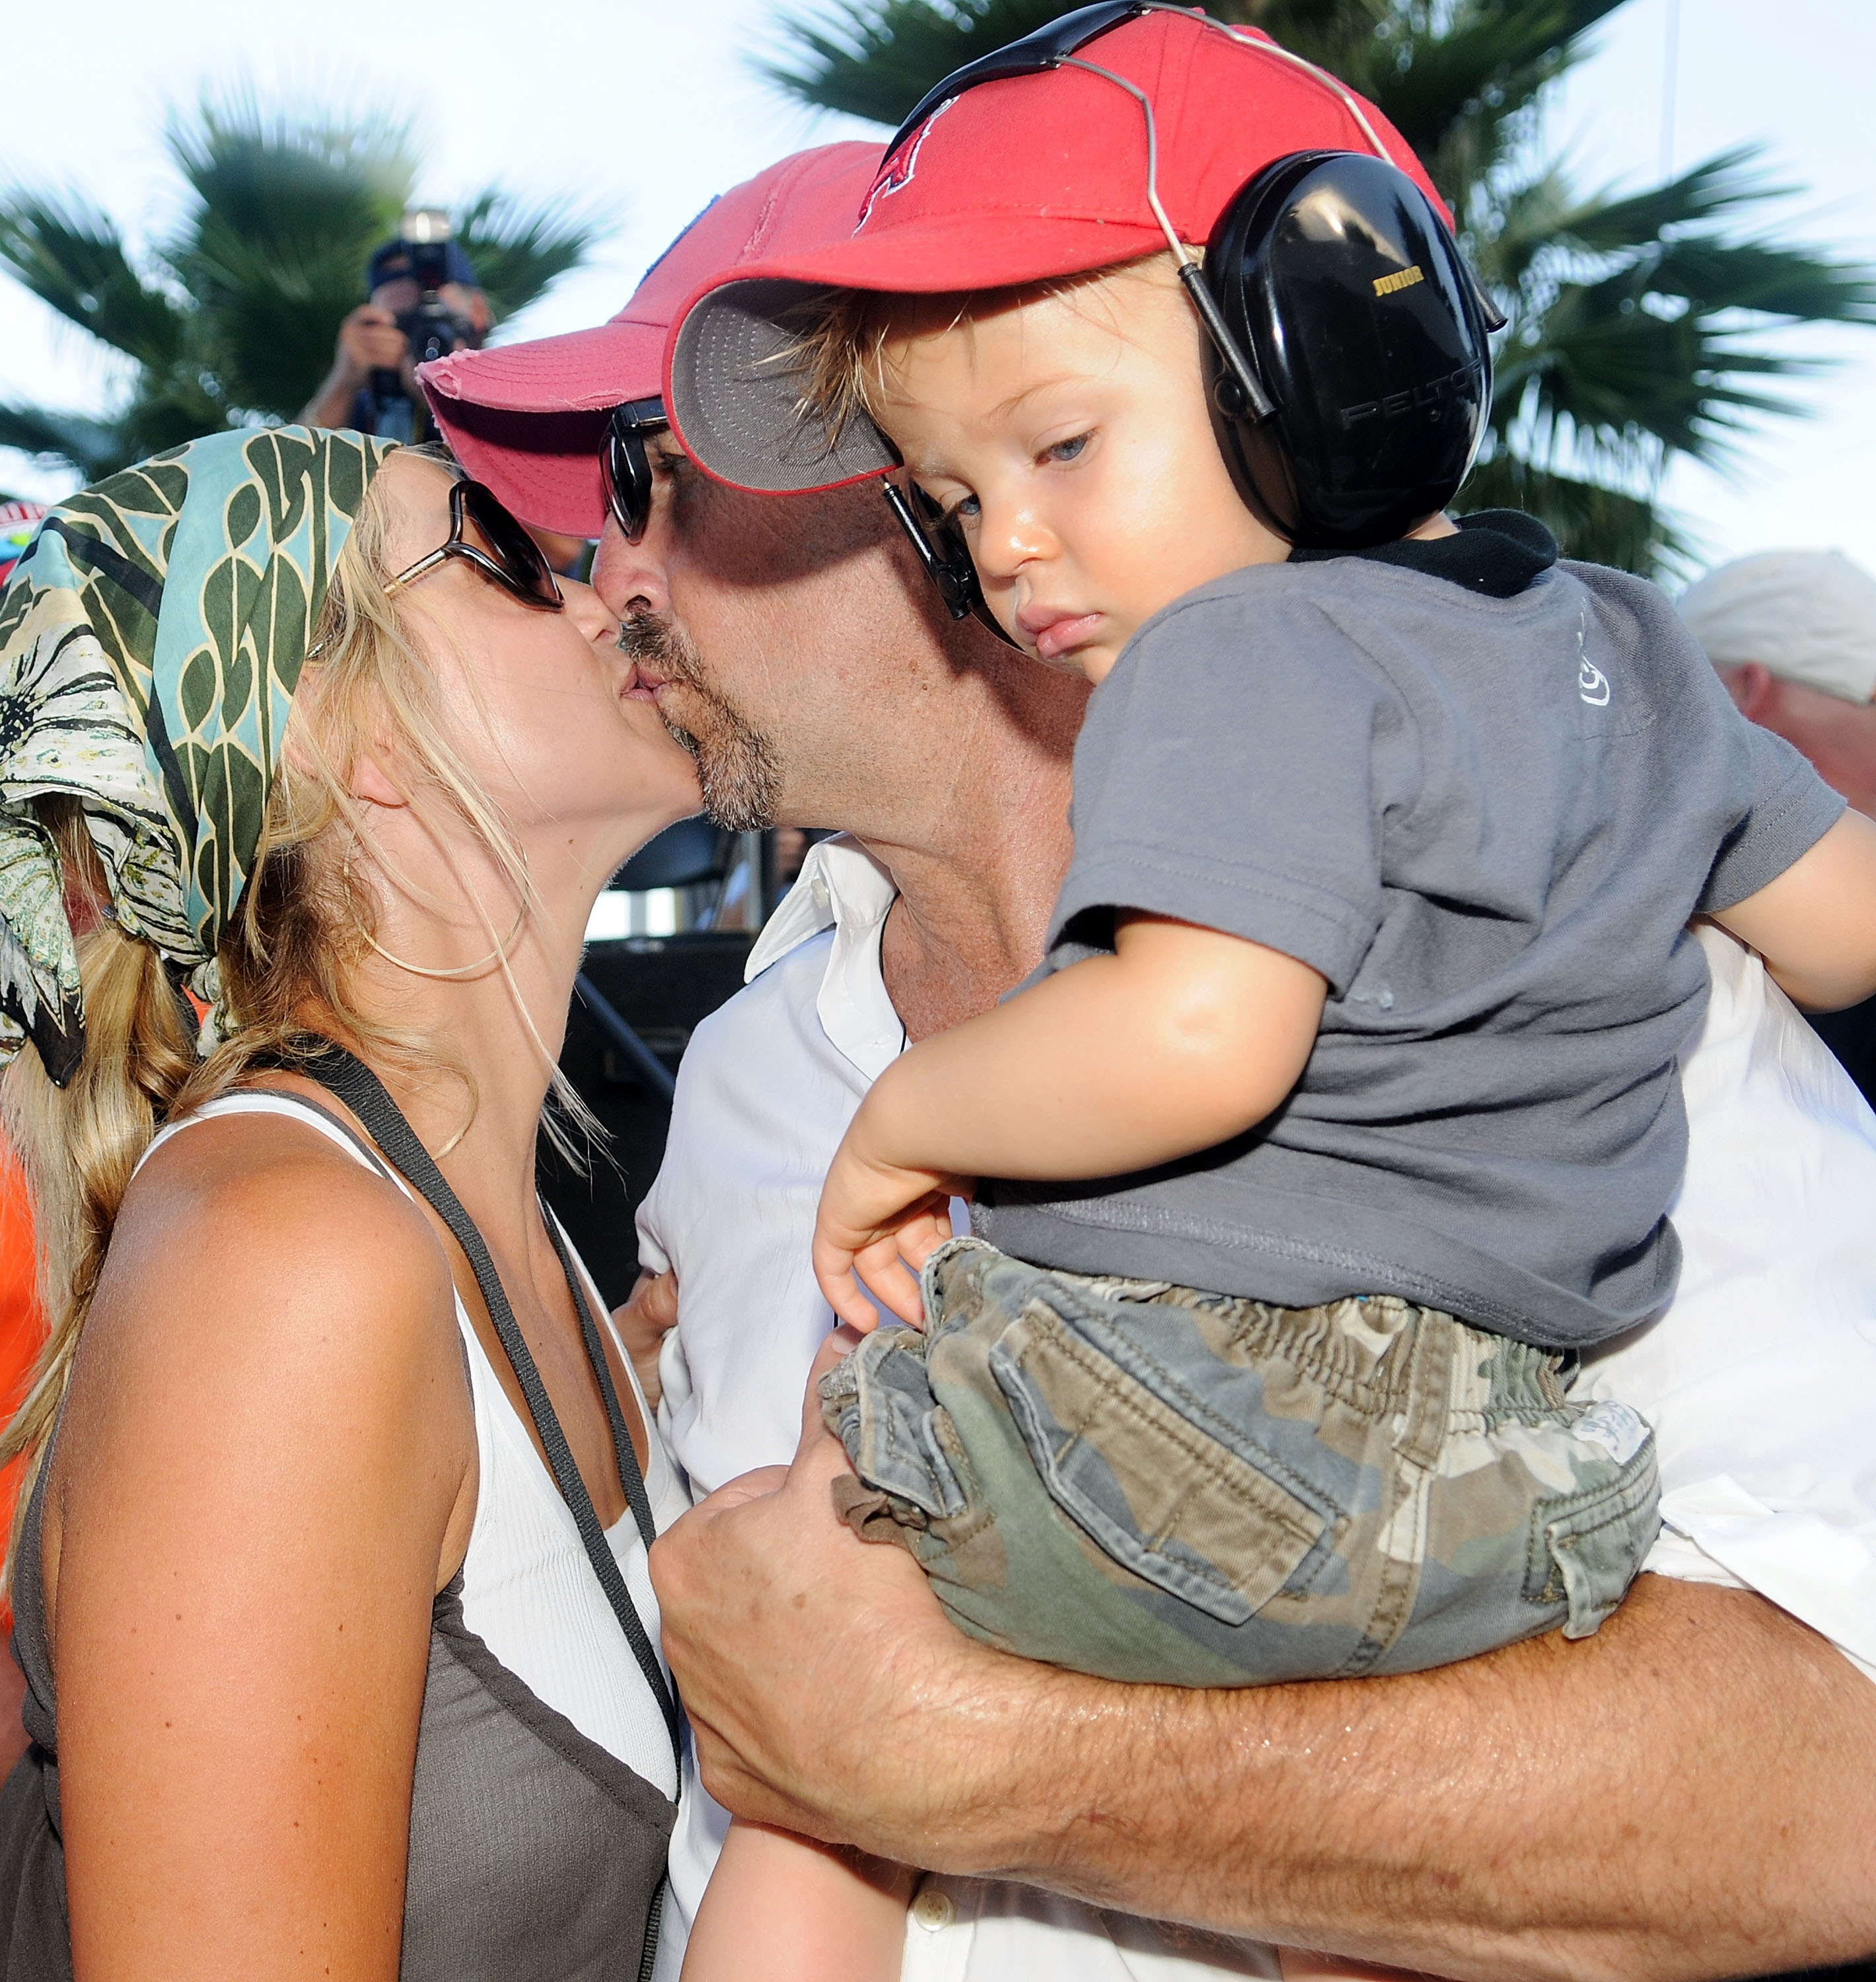 Actor Kevin Costner and his wife Christine Baumgartner with their son Cayden Costner at Daytona International Speedway on July 5, 2008 in Daytona Beach, Florida. | Source: Getty Images